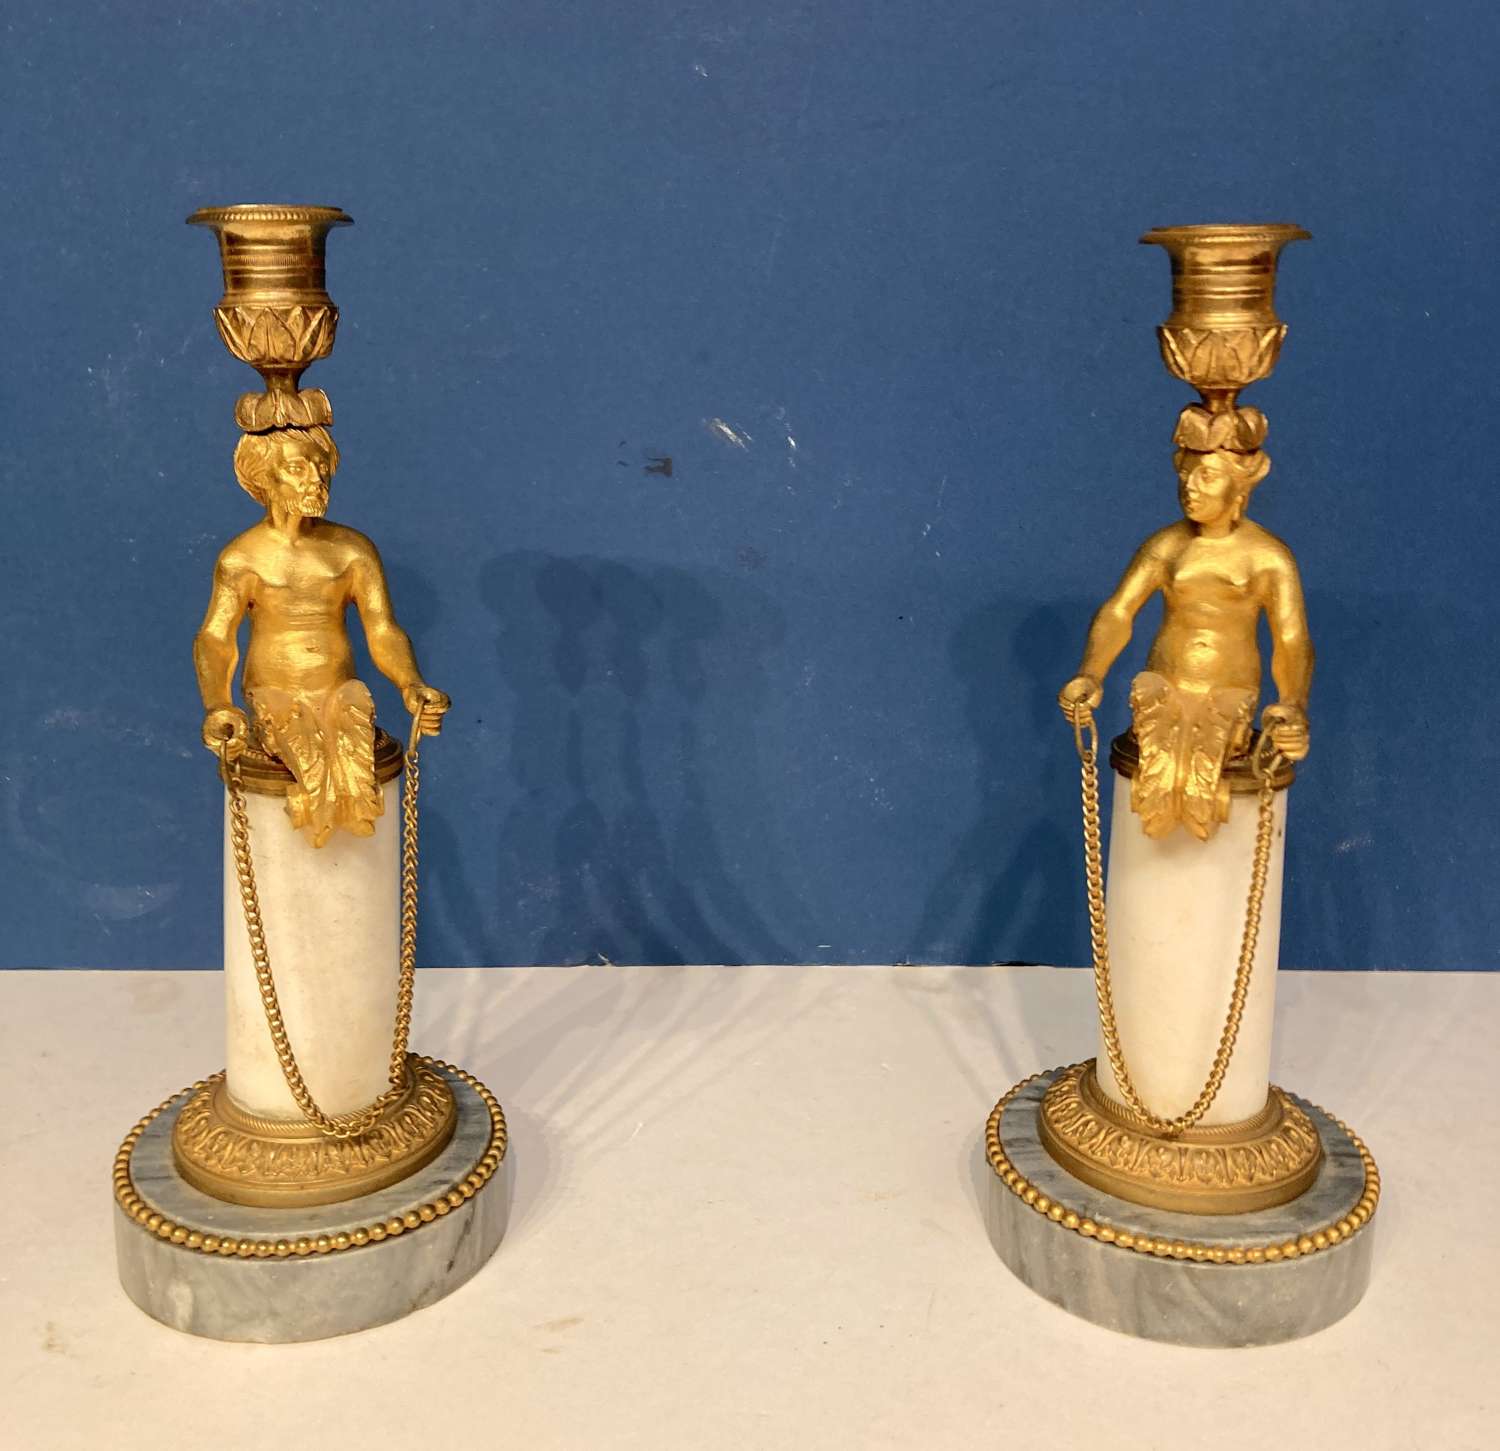 Pair of 19th century French ormolu and marble candlesticks.